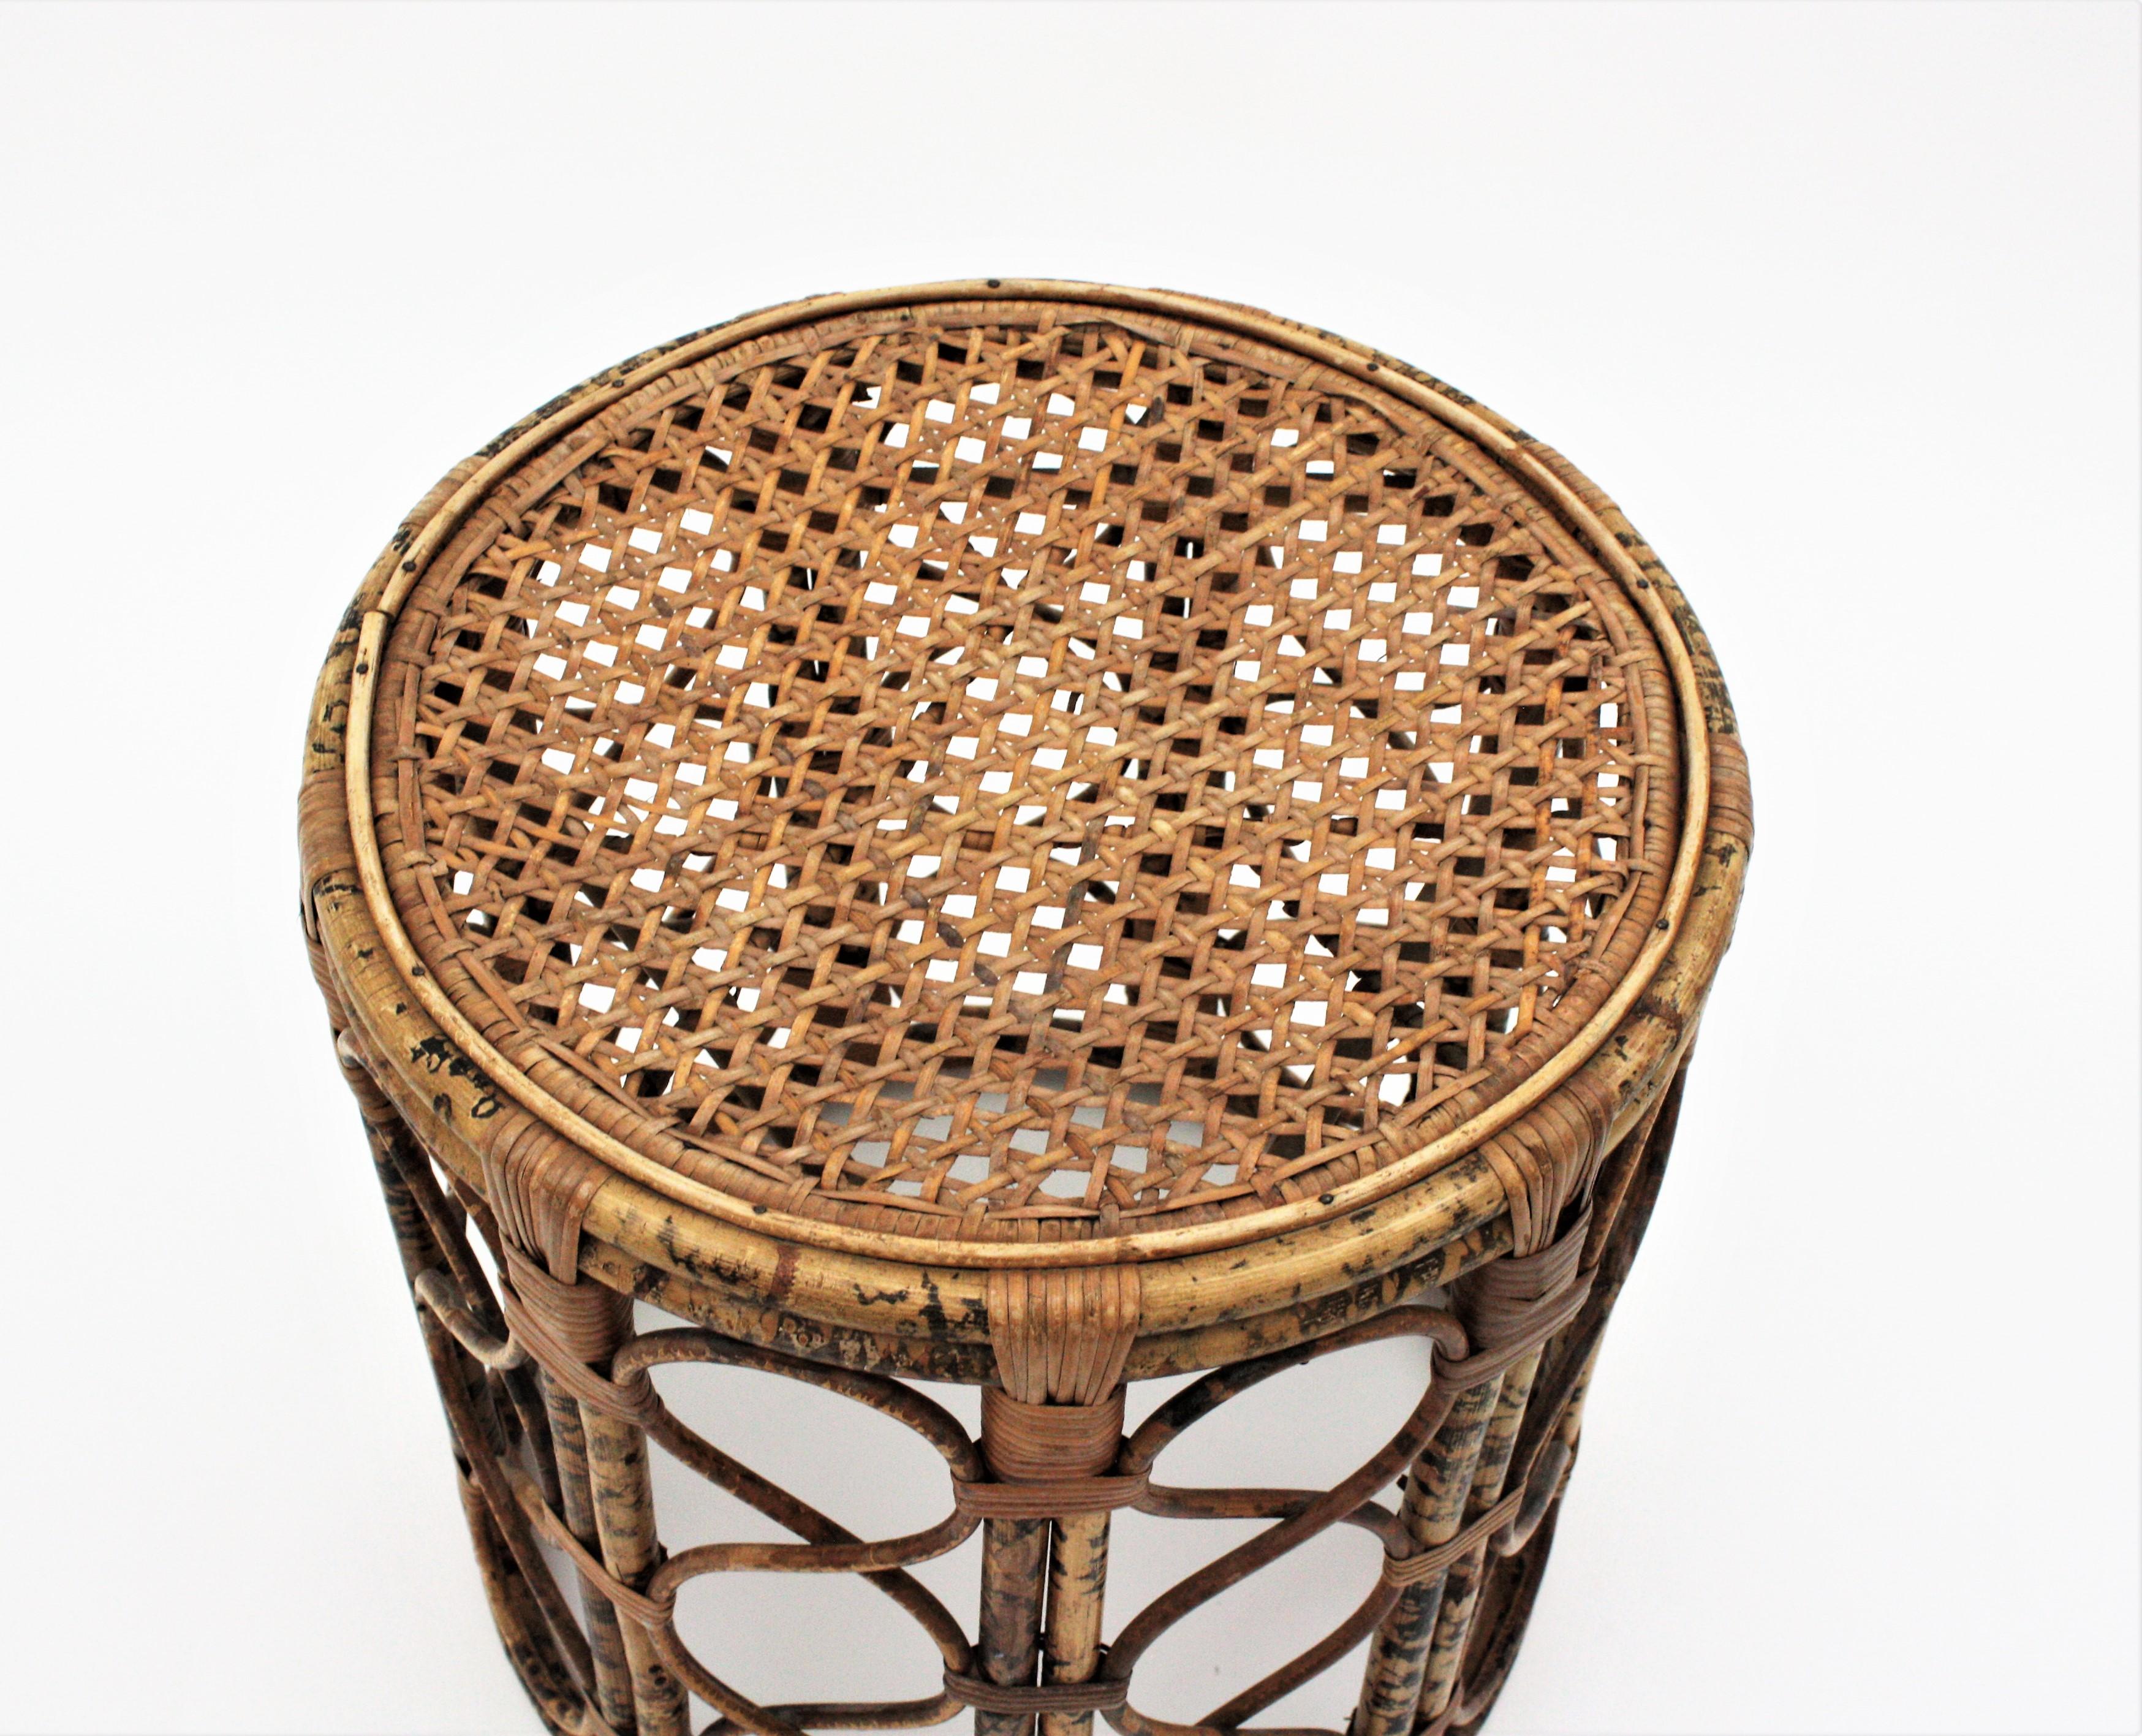 French Side Table or Stool in Tiger Bamboo Rattan with Woven Wicker Top, 1940s For Sale 8